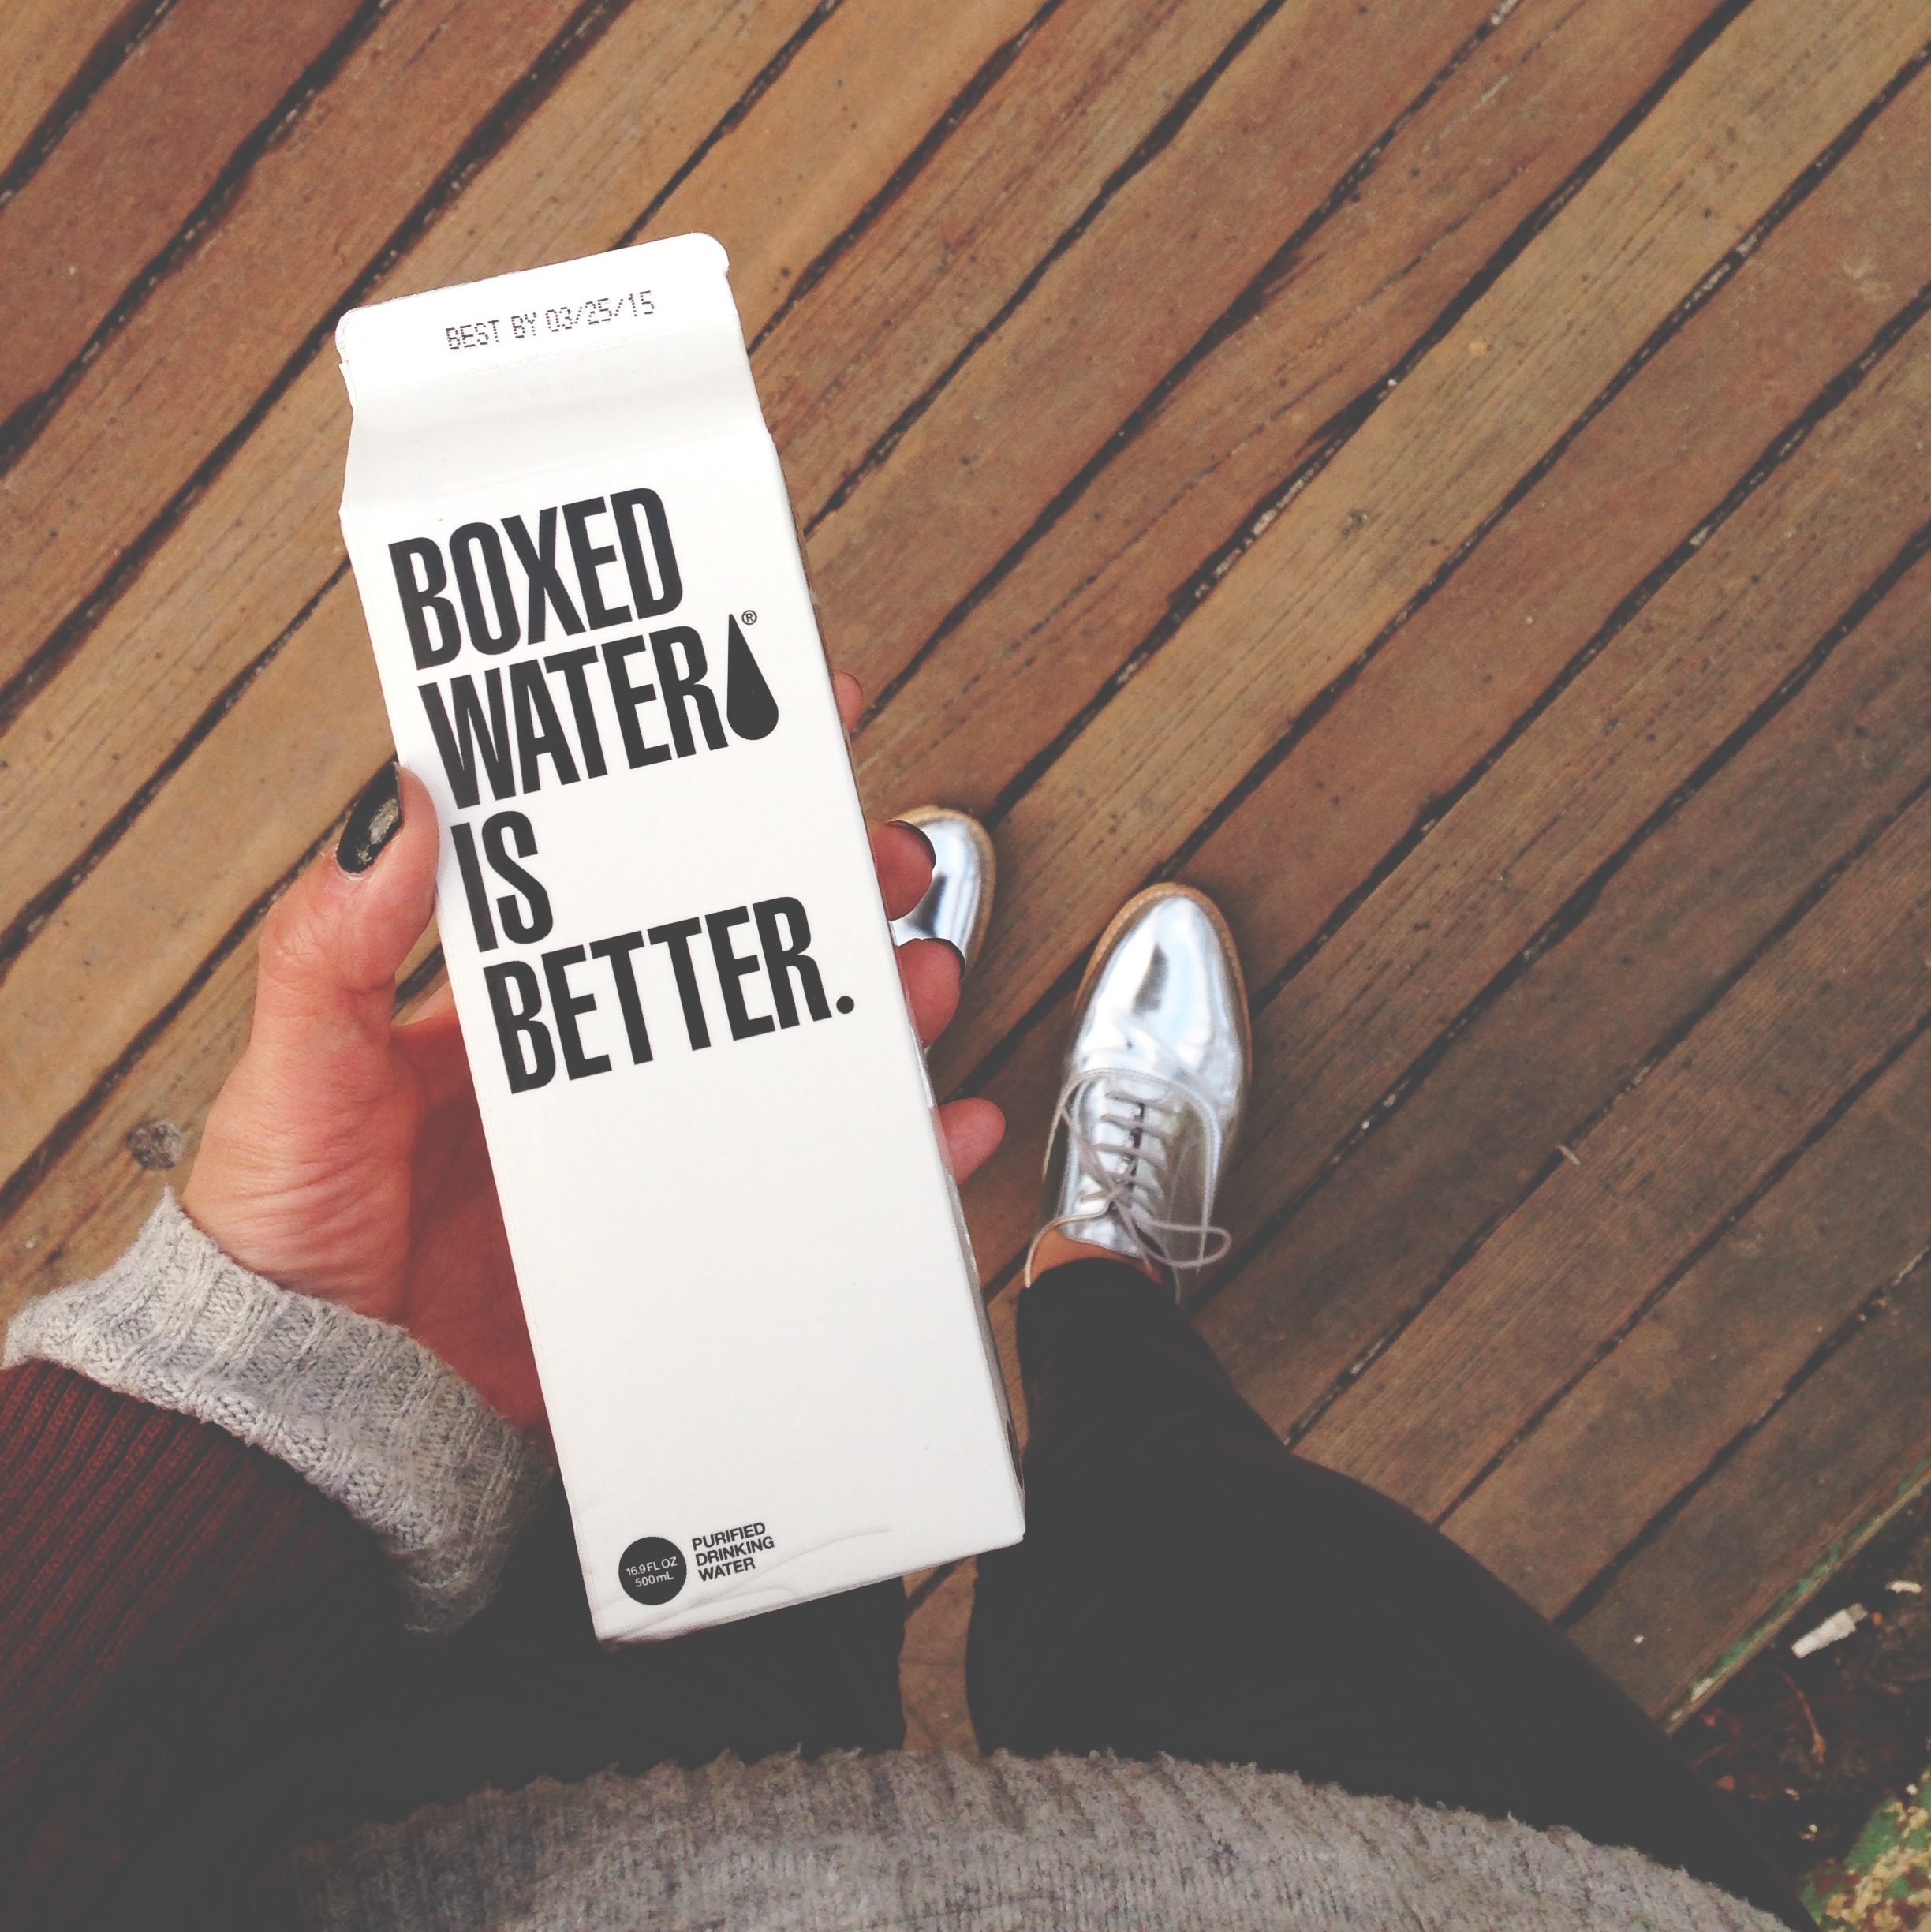 Better me отзывы. Water is better. Water Box. Boxed Water is better. Well being бокс.